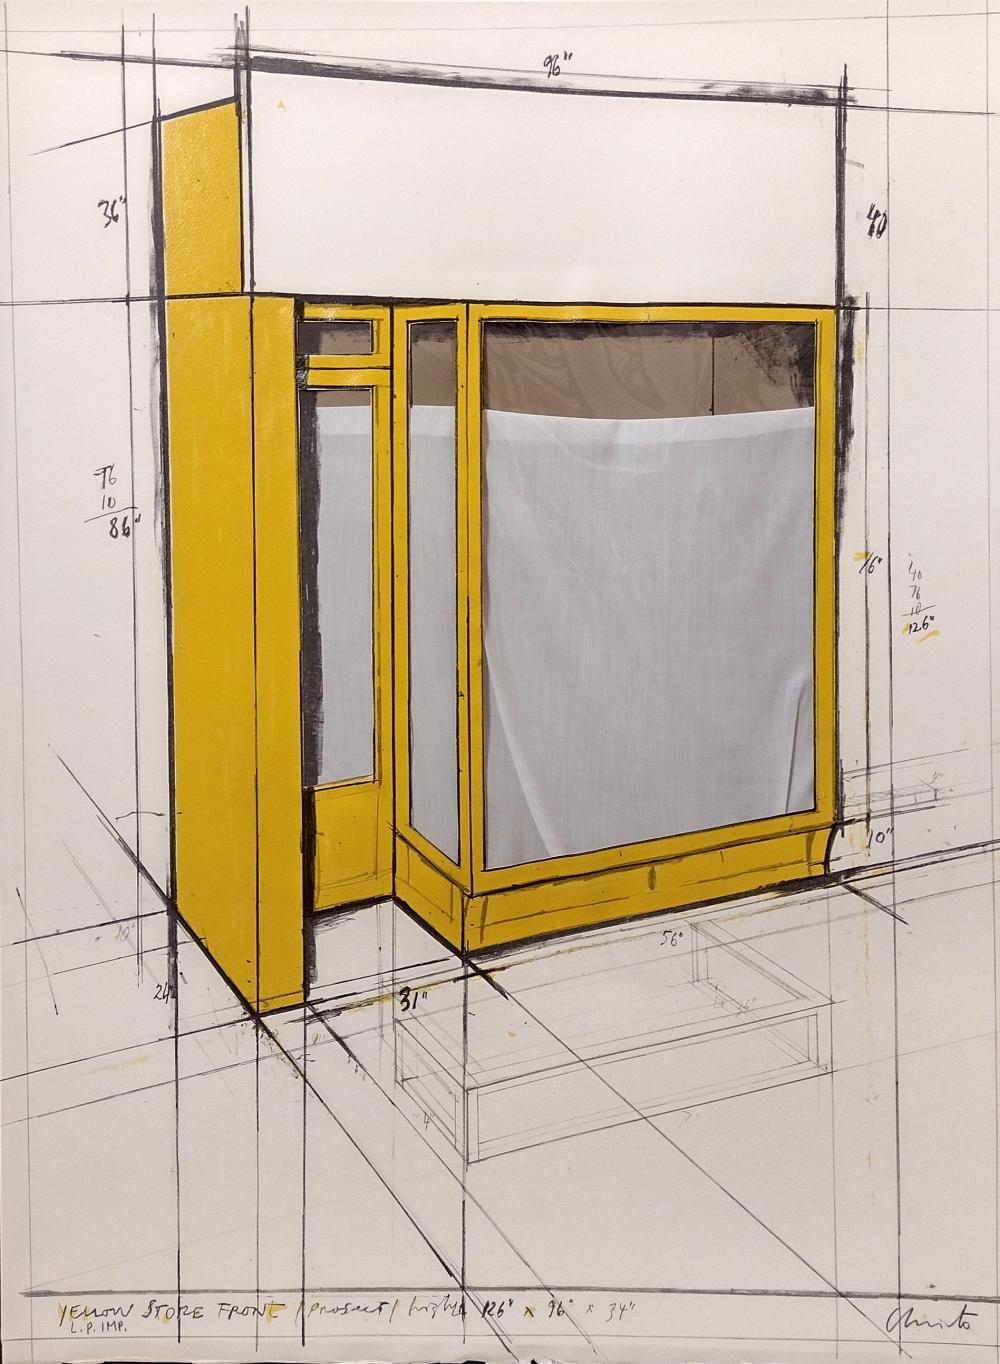 CHRISTO AND JEANNE-CLAUDE, YELLOW STORE FRONT - 1980 - MIXED MEDIA - Mixed Media Art by Christo and Jeanne-Claude